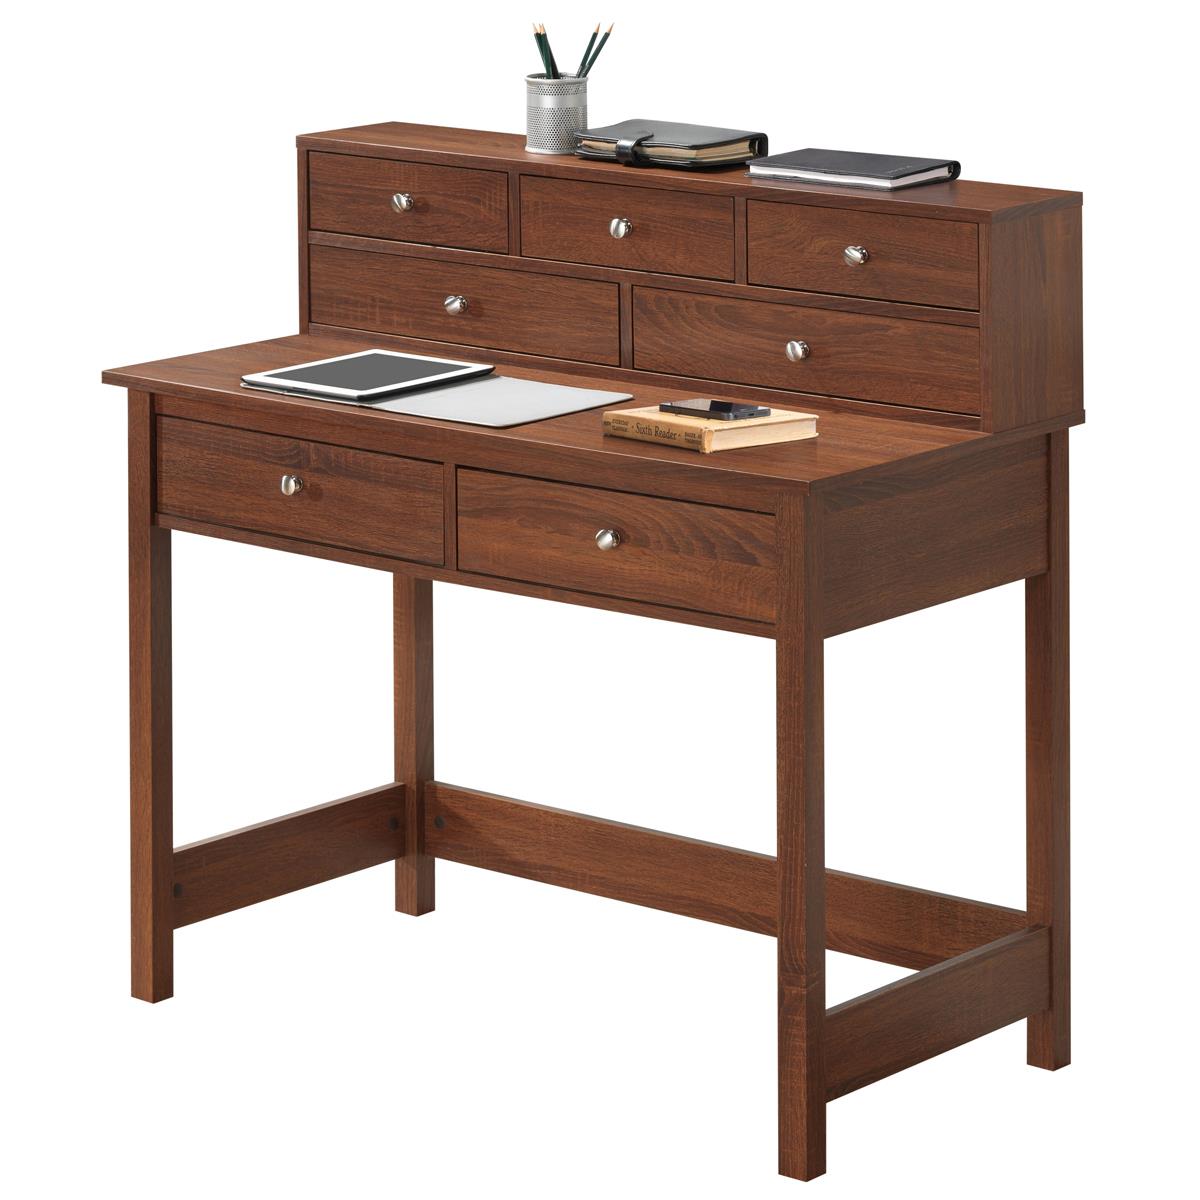 Office Express Home Office Writing Desk with Shelf   Brown